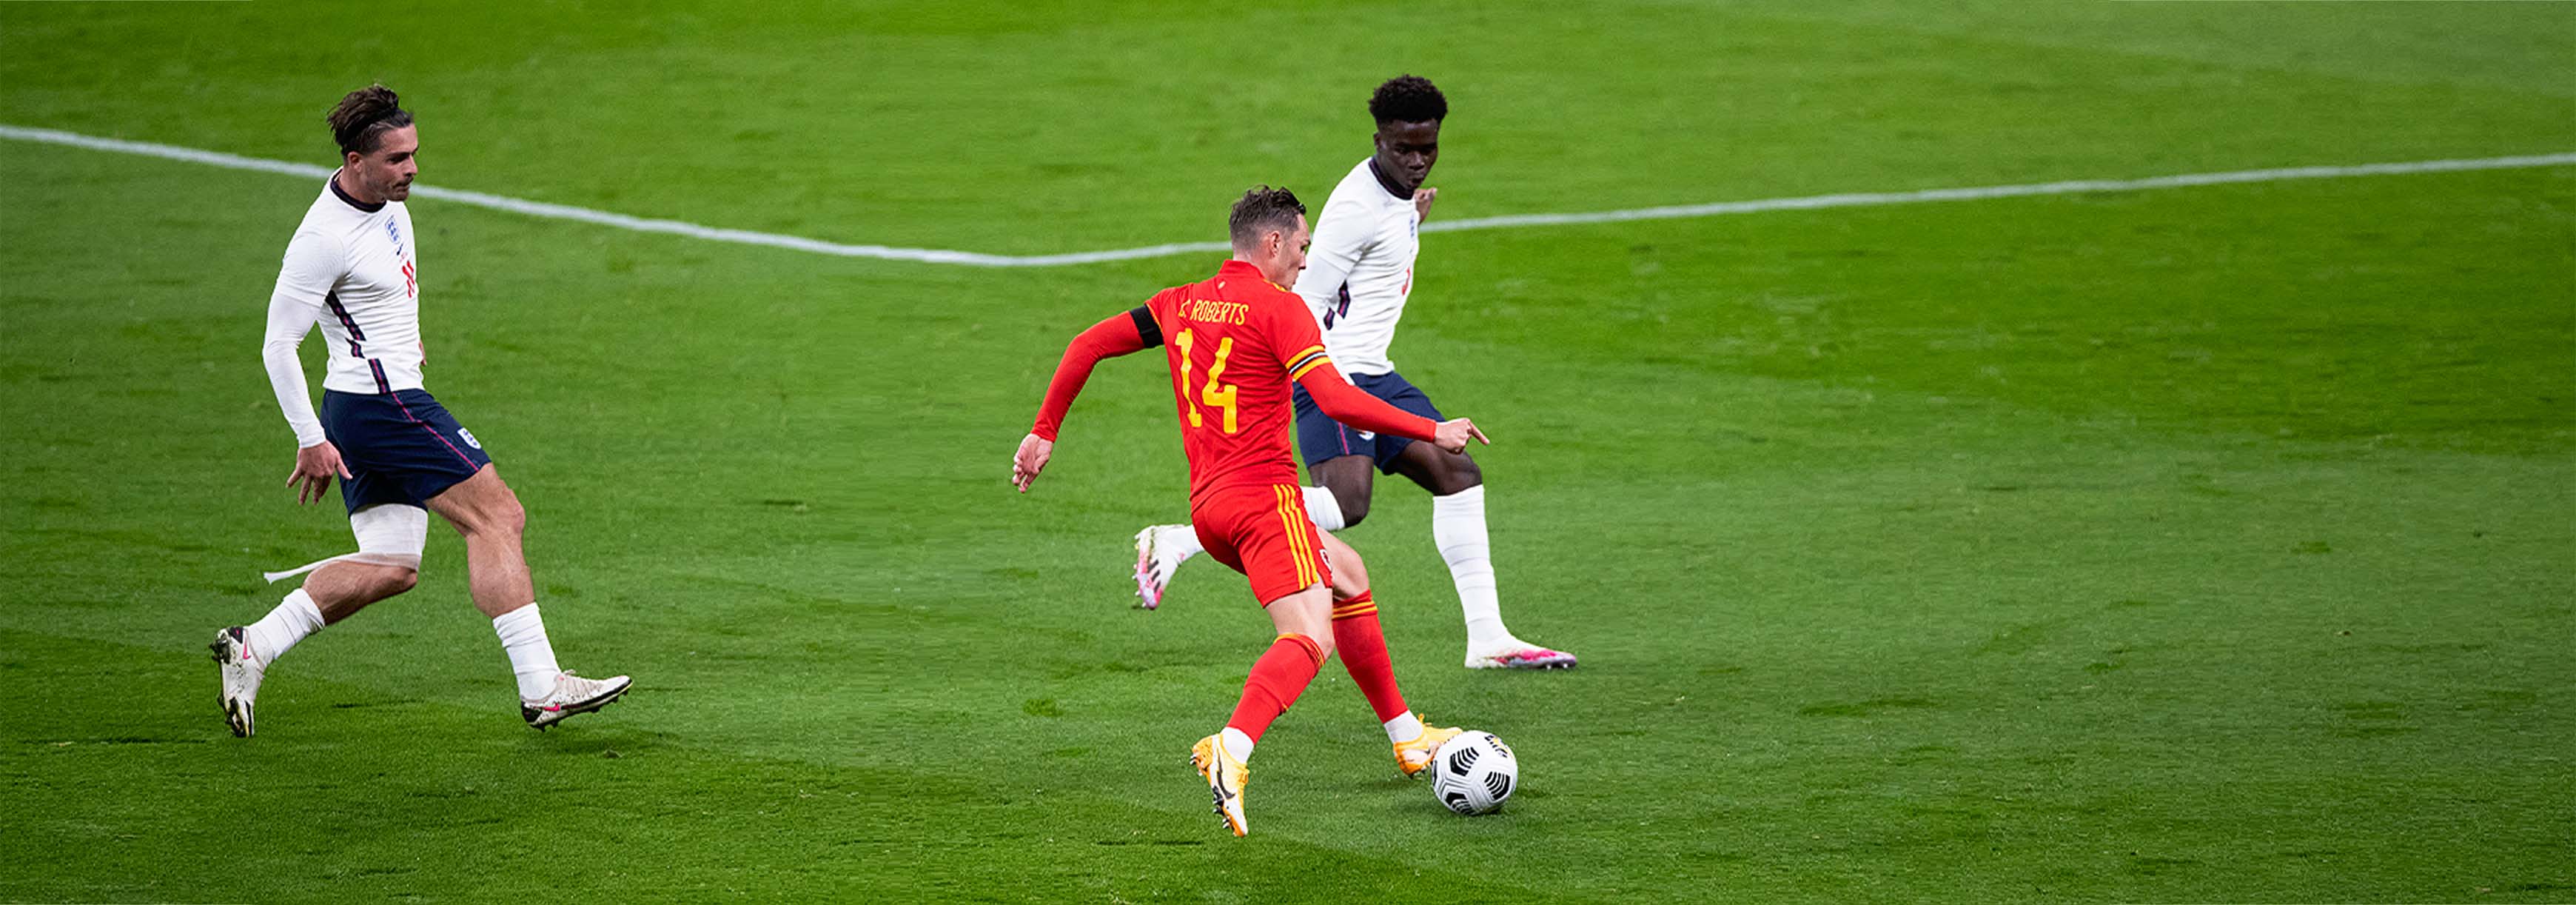 2 england players wearing white playing against a player from Wales wearing red. The player in red is going to kick the ball with his back faced to the camera.